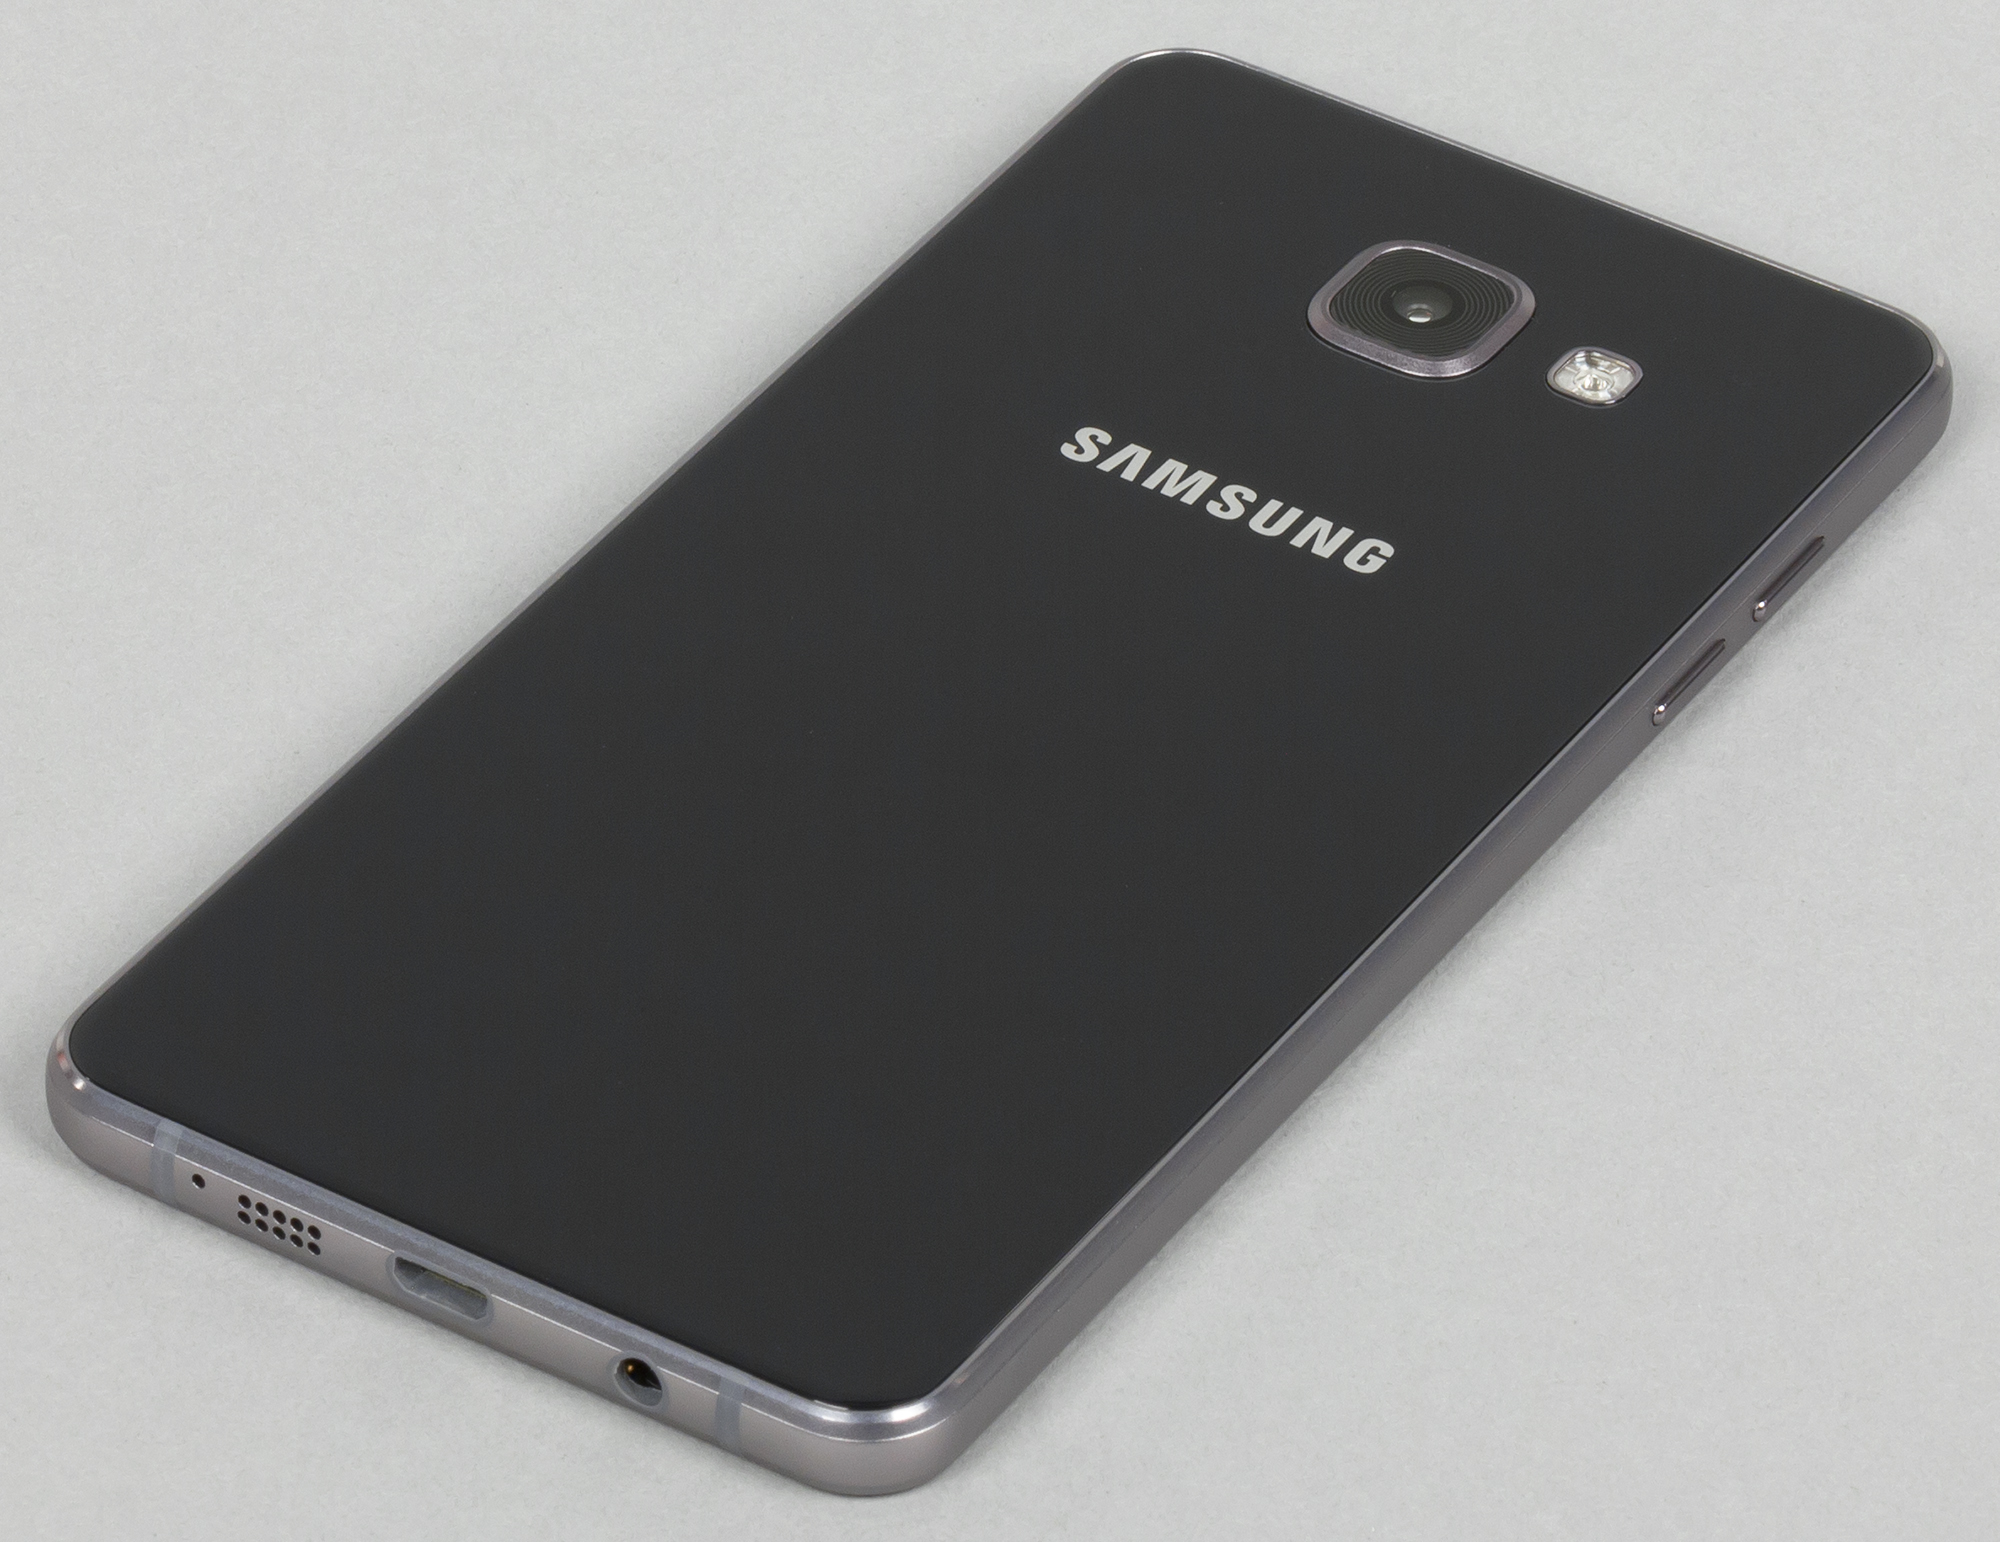 Samsung Galaxy A6 and Galaxy A6 + approved by the Federal Communications Commission